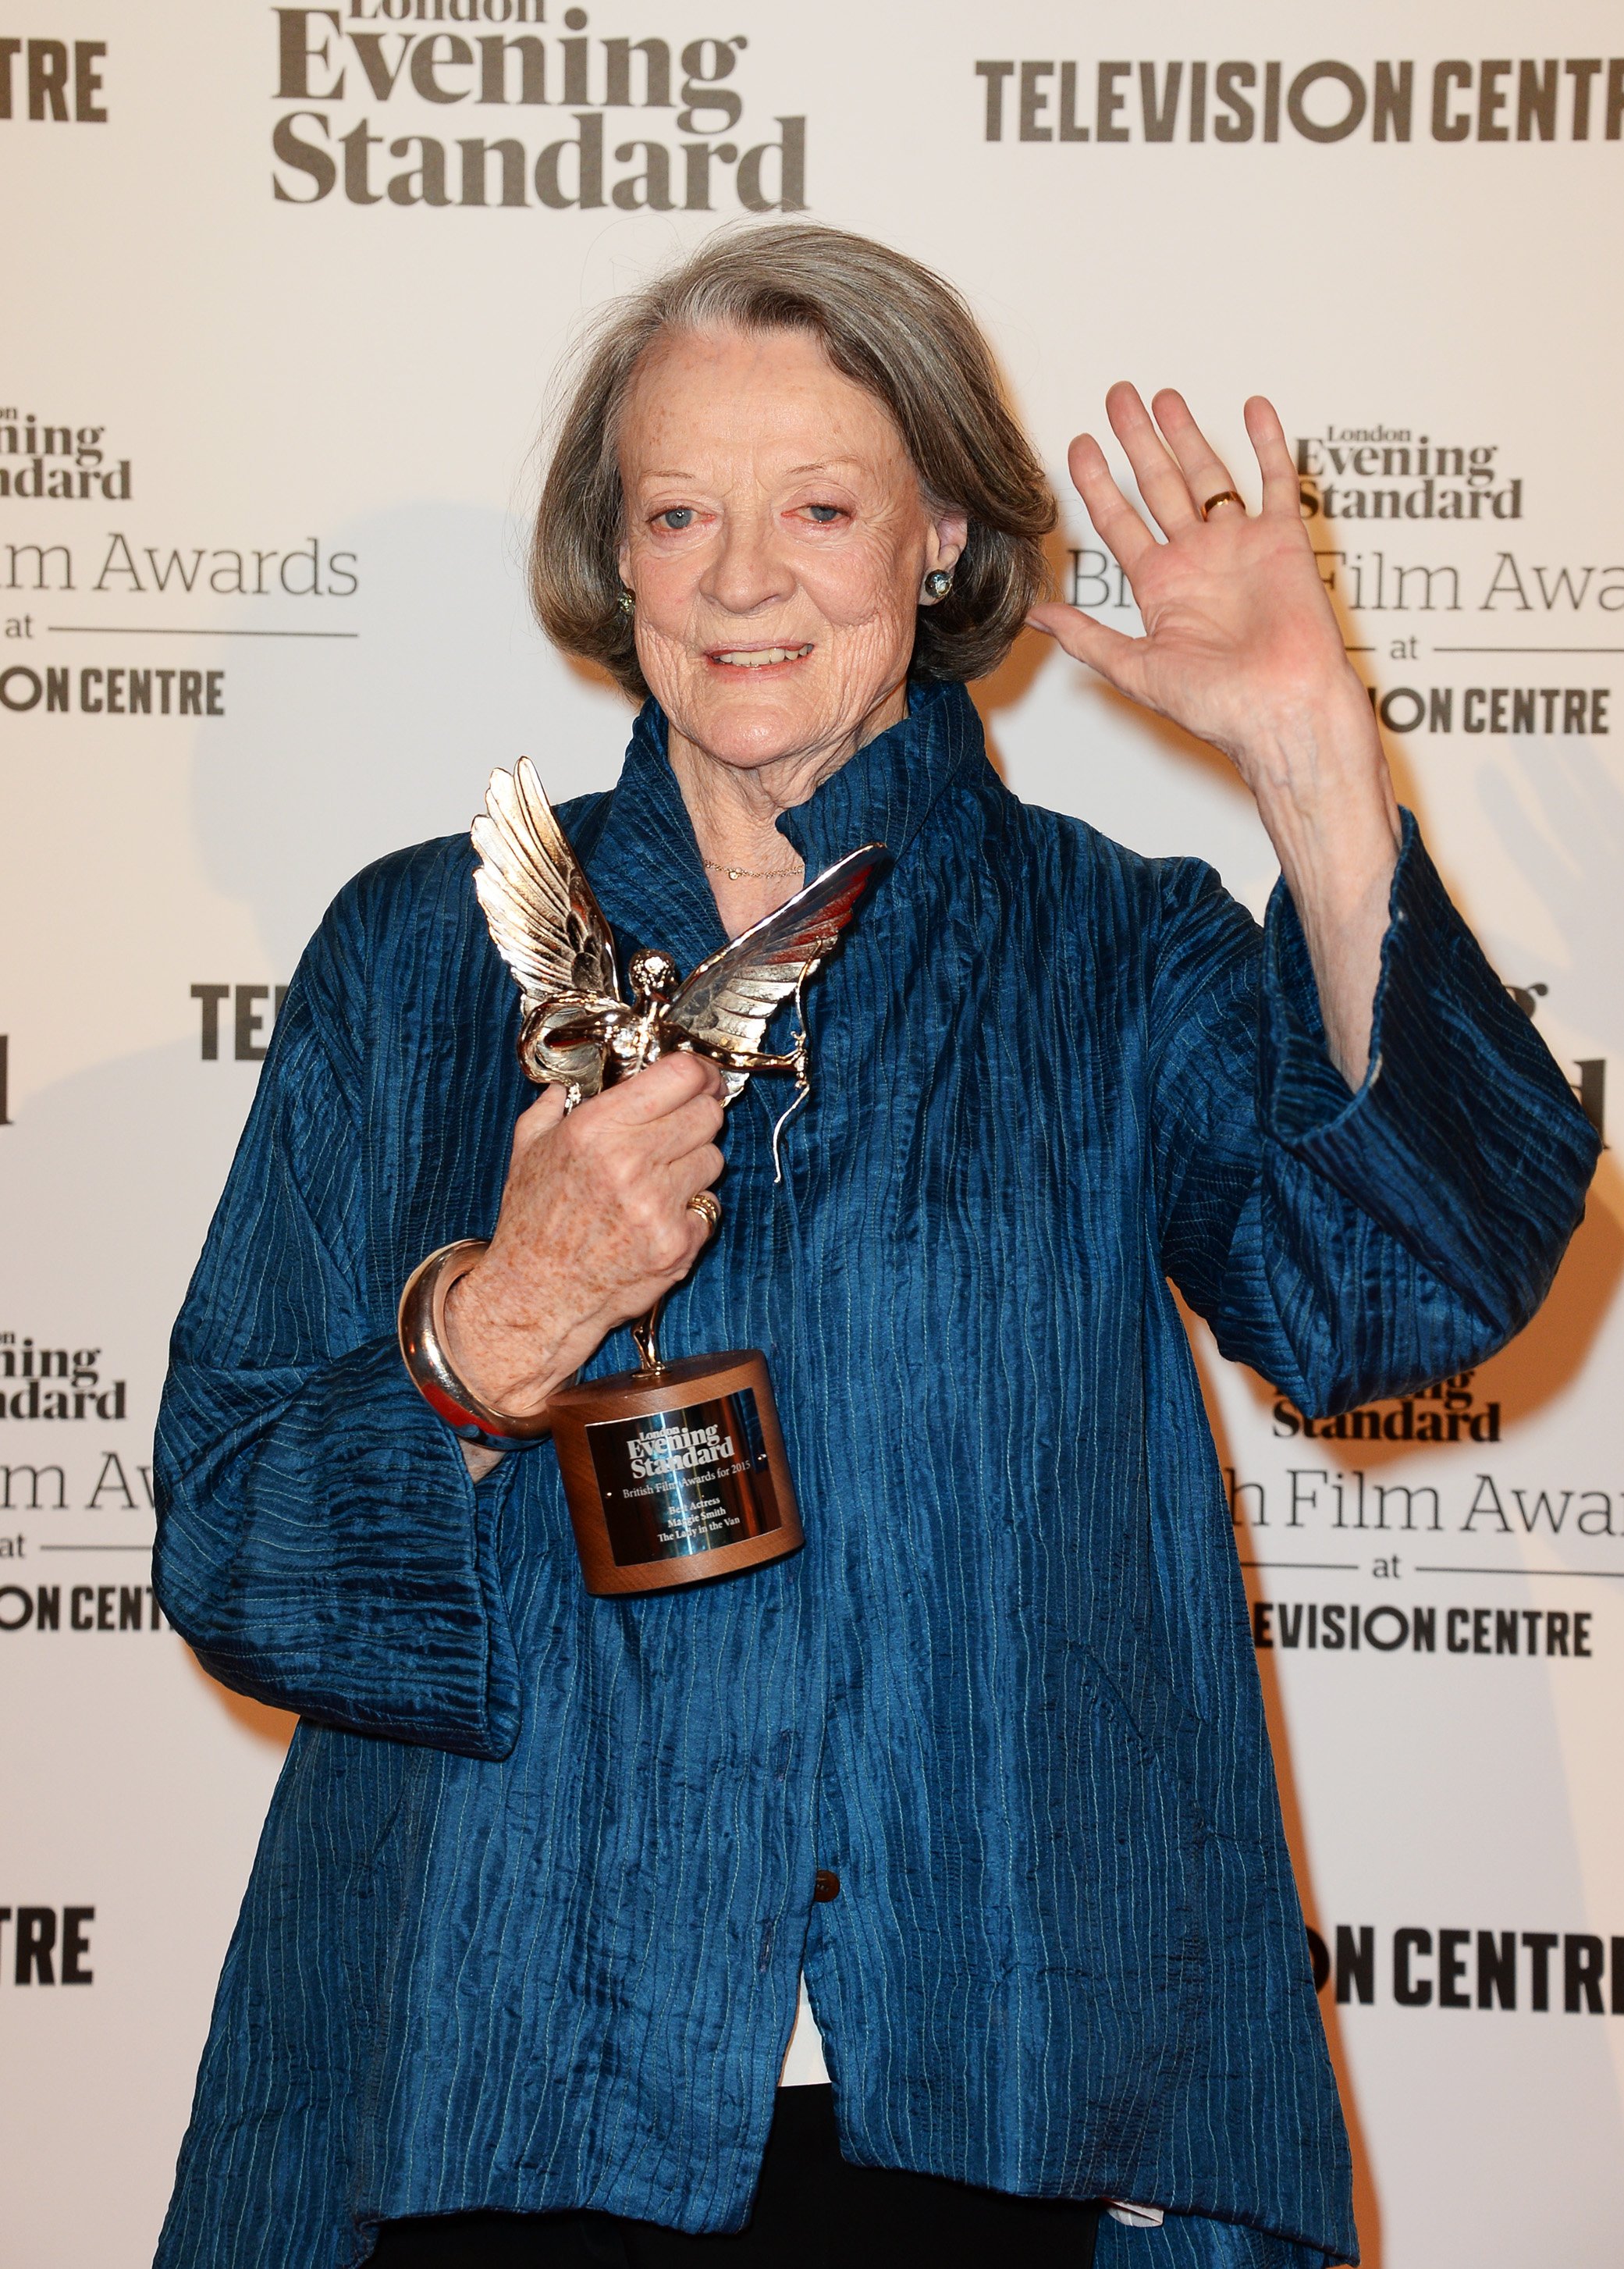 Dame Maggie Smith, winner of the Best Actress award for "The Lady in the Van" at the London Evening Standard British Film Awards at Television Centre on February 7, 2016 in London, England. | Source: Getty Images